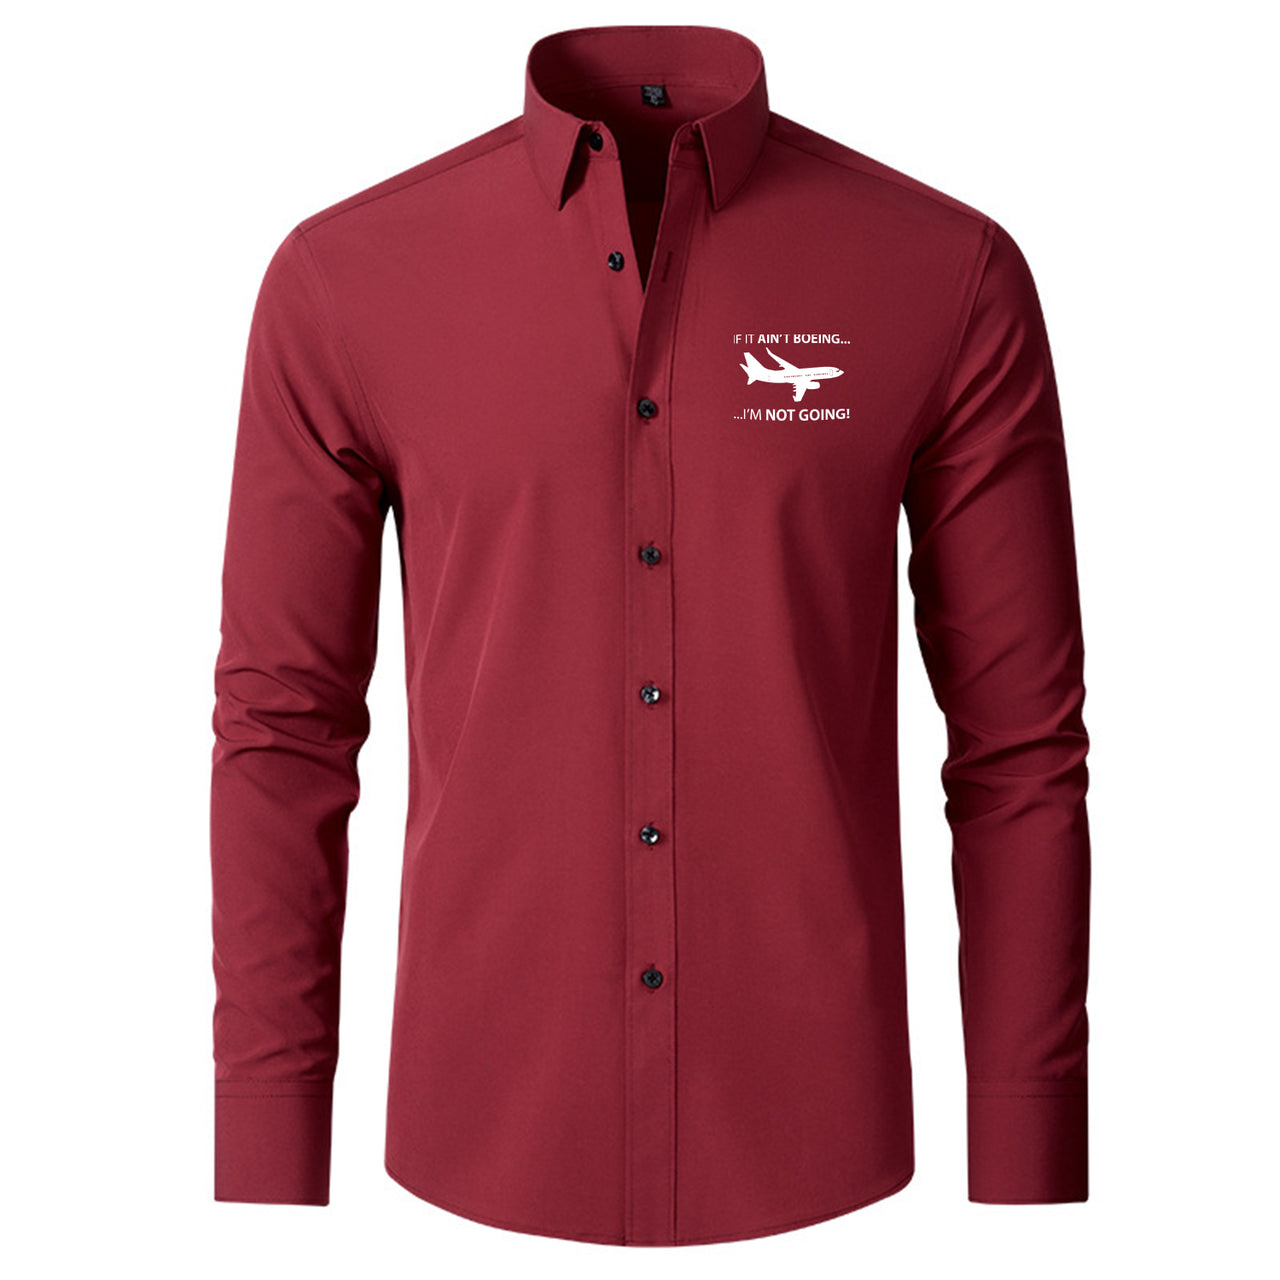 If It Ain't Boeing I'm Not Going! Designed Long Sleeve Shirts